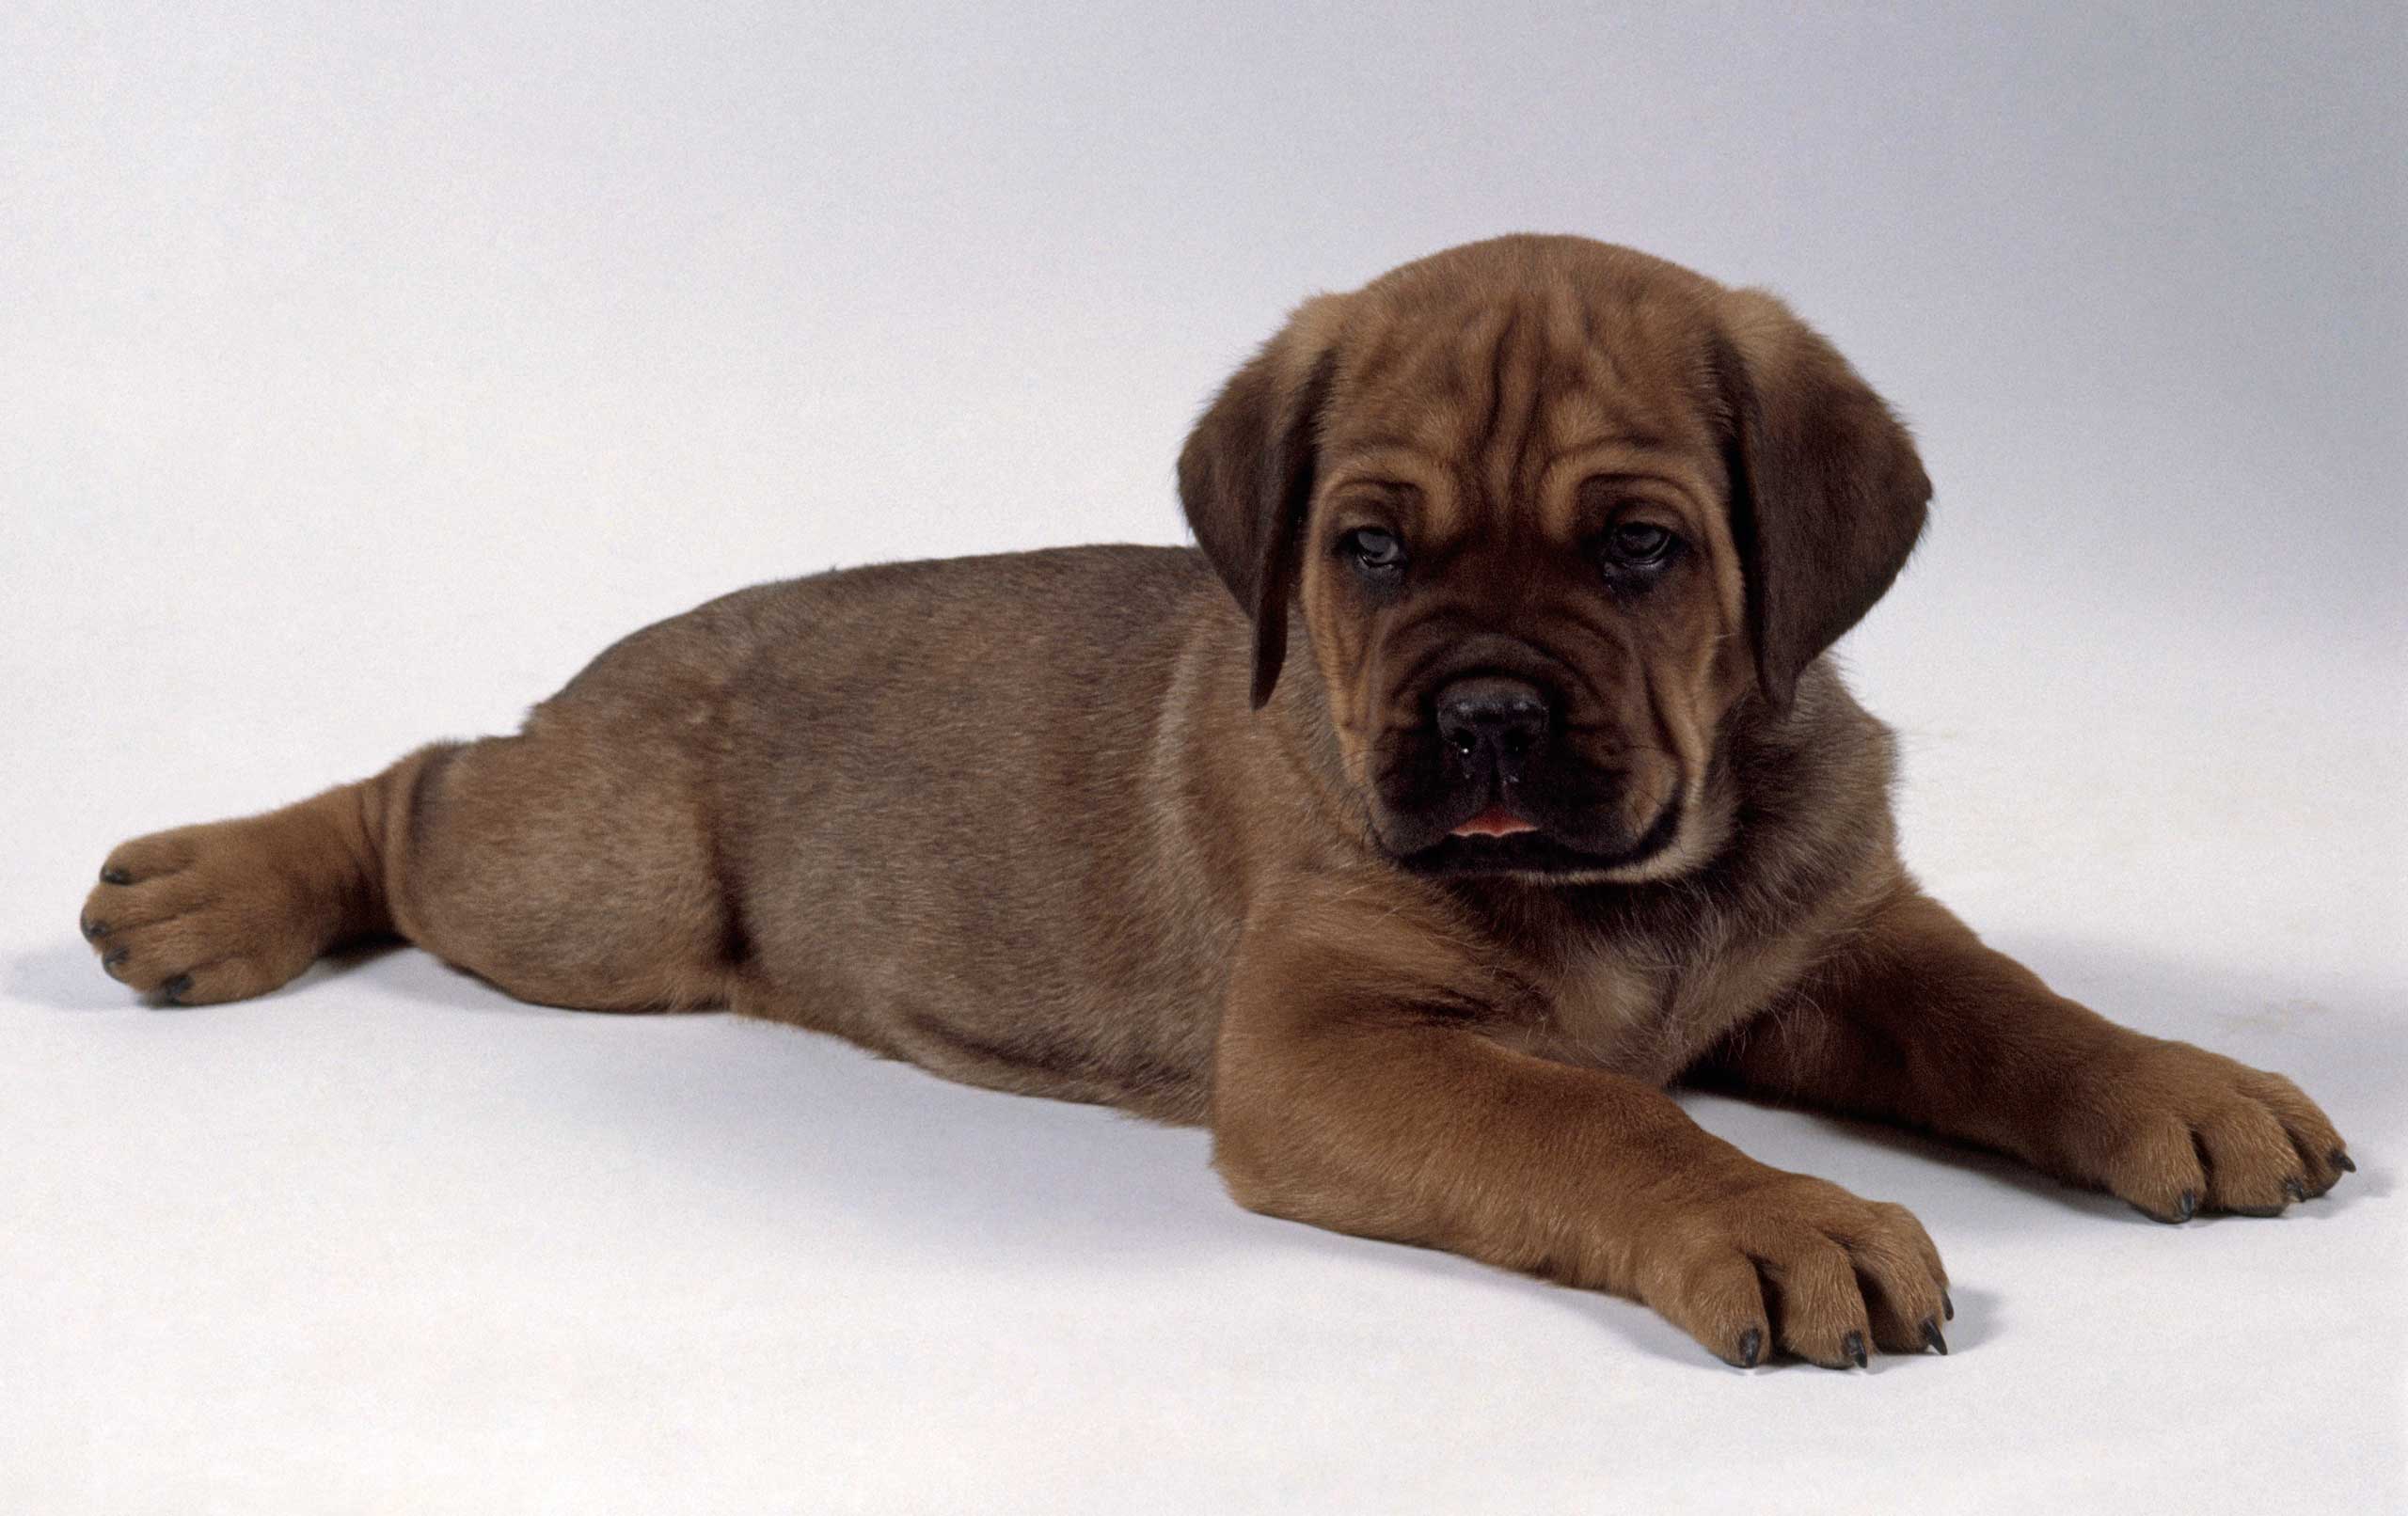 A Cane Corso puppy. (Getty Images)